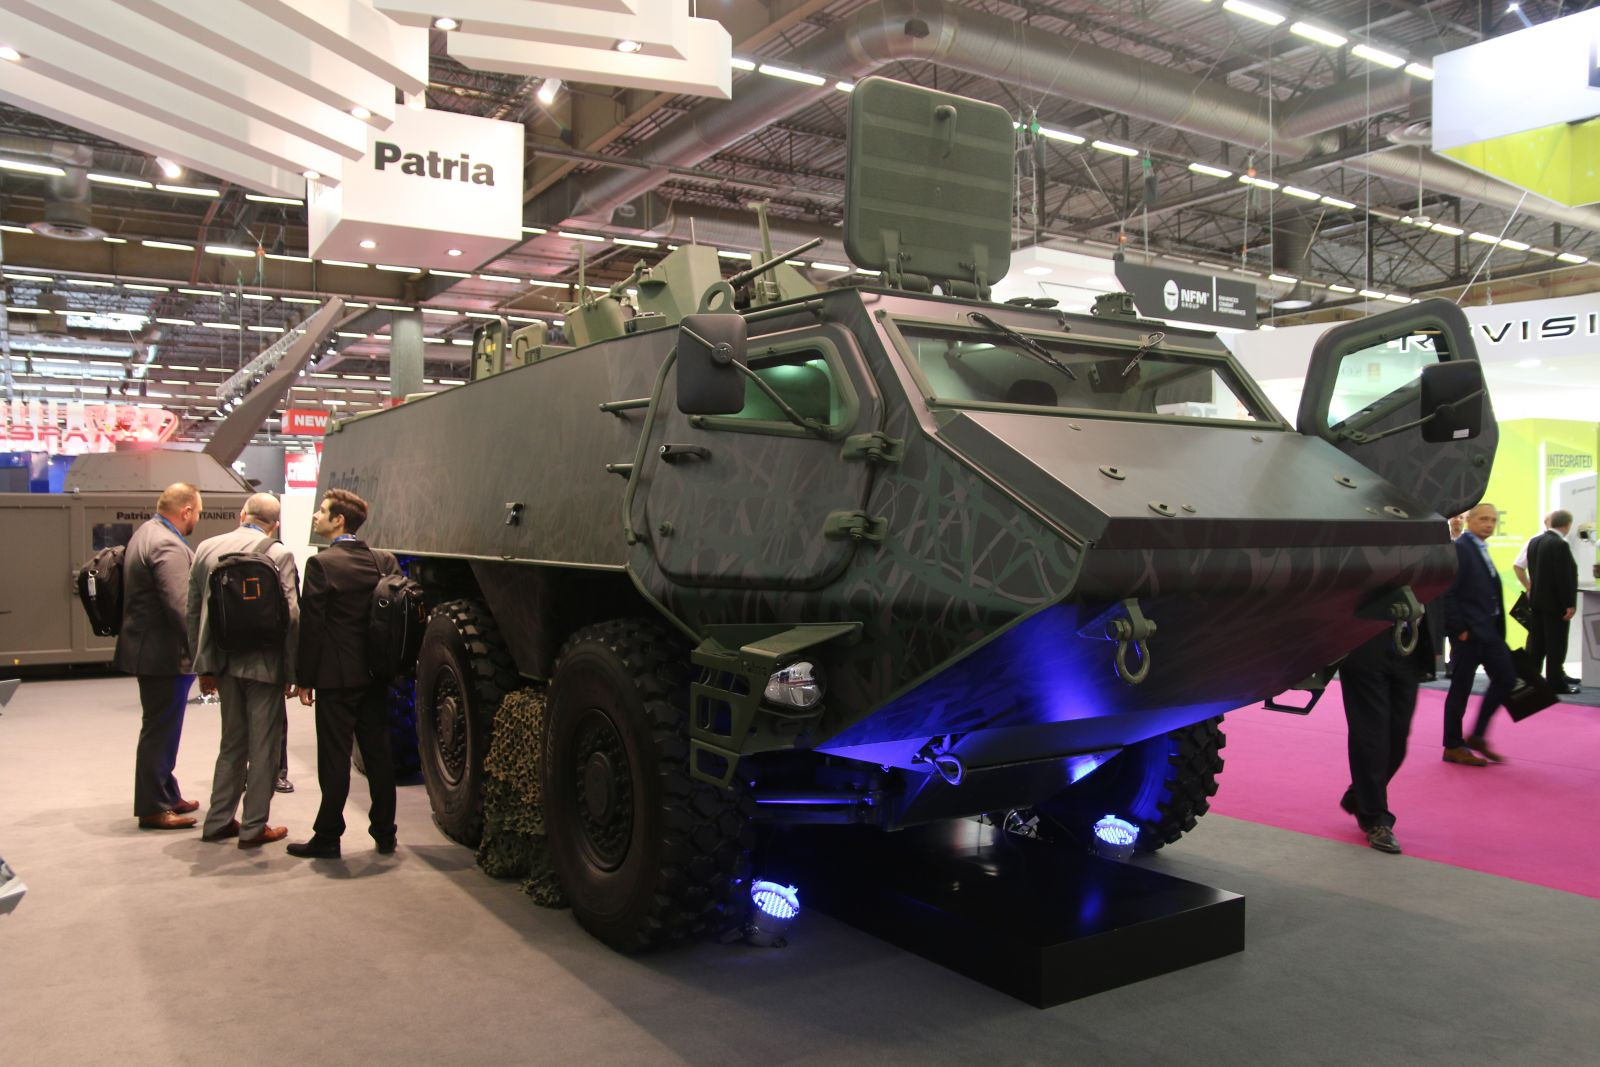 Finland and Latvia ordered the first 200 6×6 armored vehicles from Homeland for 200 million